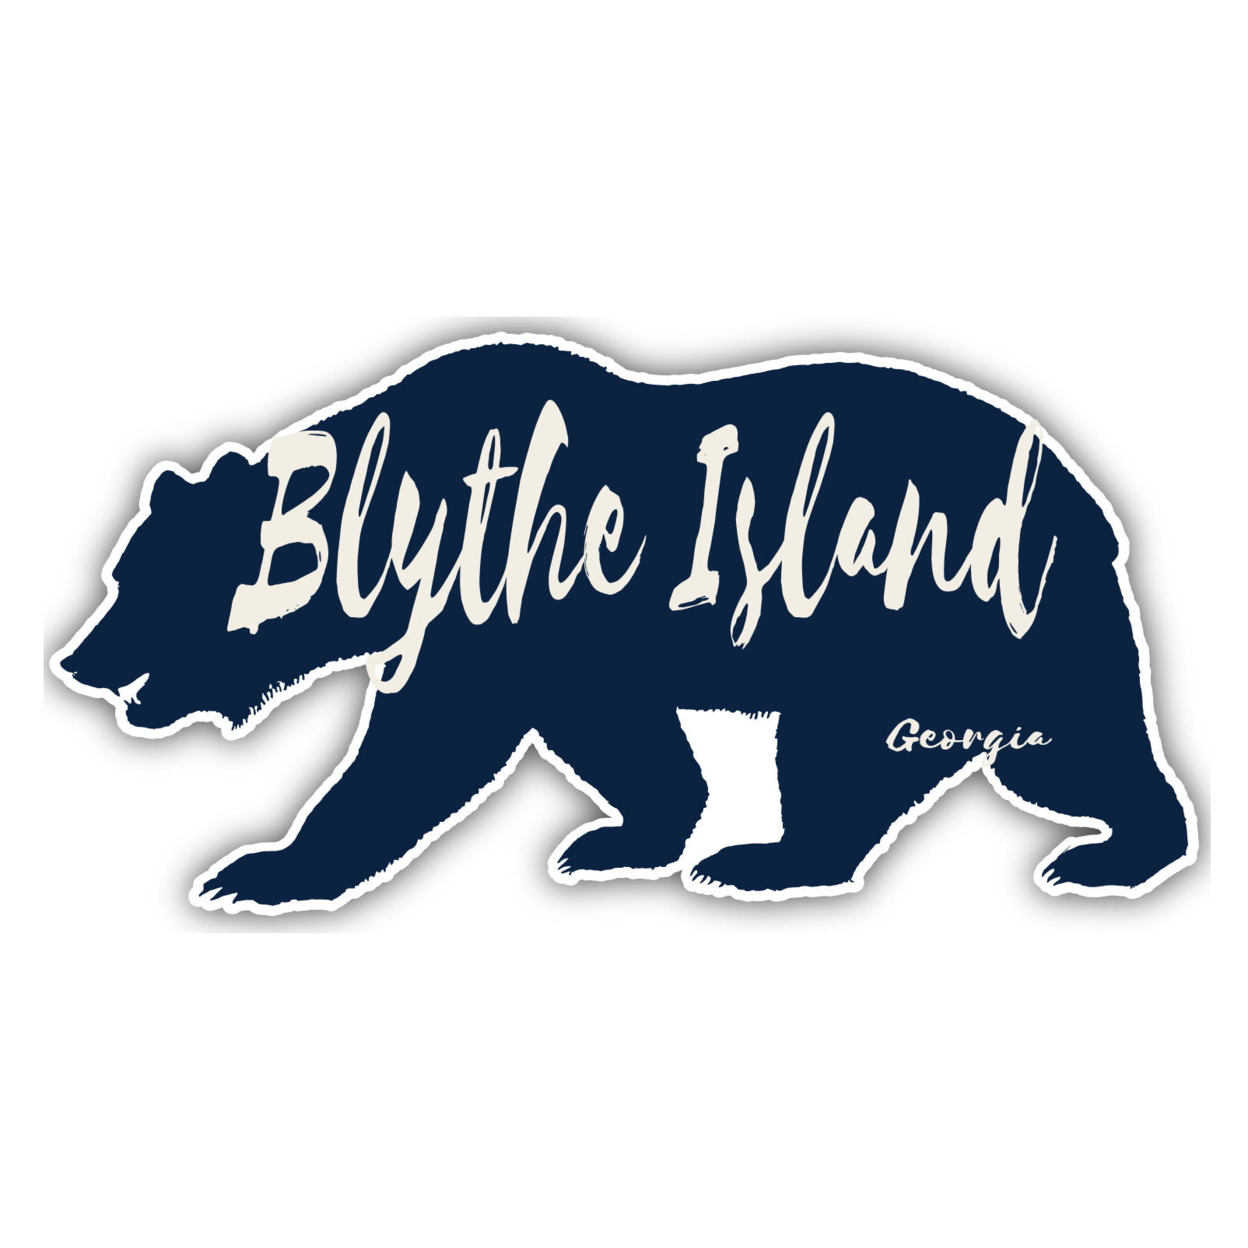 Blythe Island Georgia Souvenir Decorative Stickers (Choose Theme And Size) - 4-Pack, 12-Inch, Tent